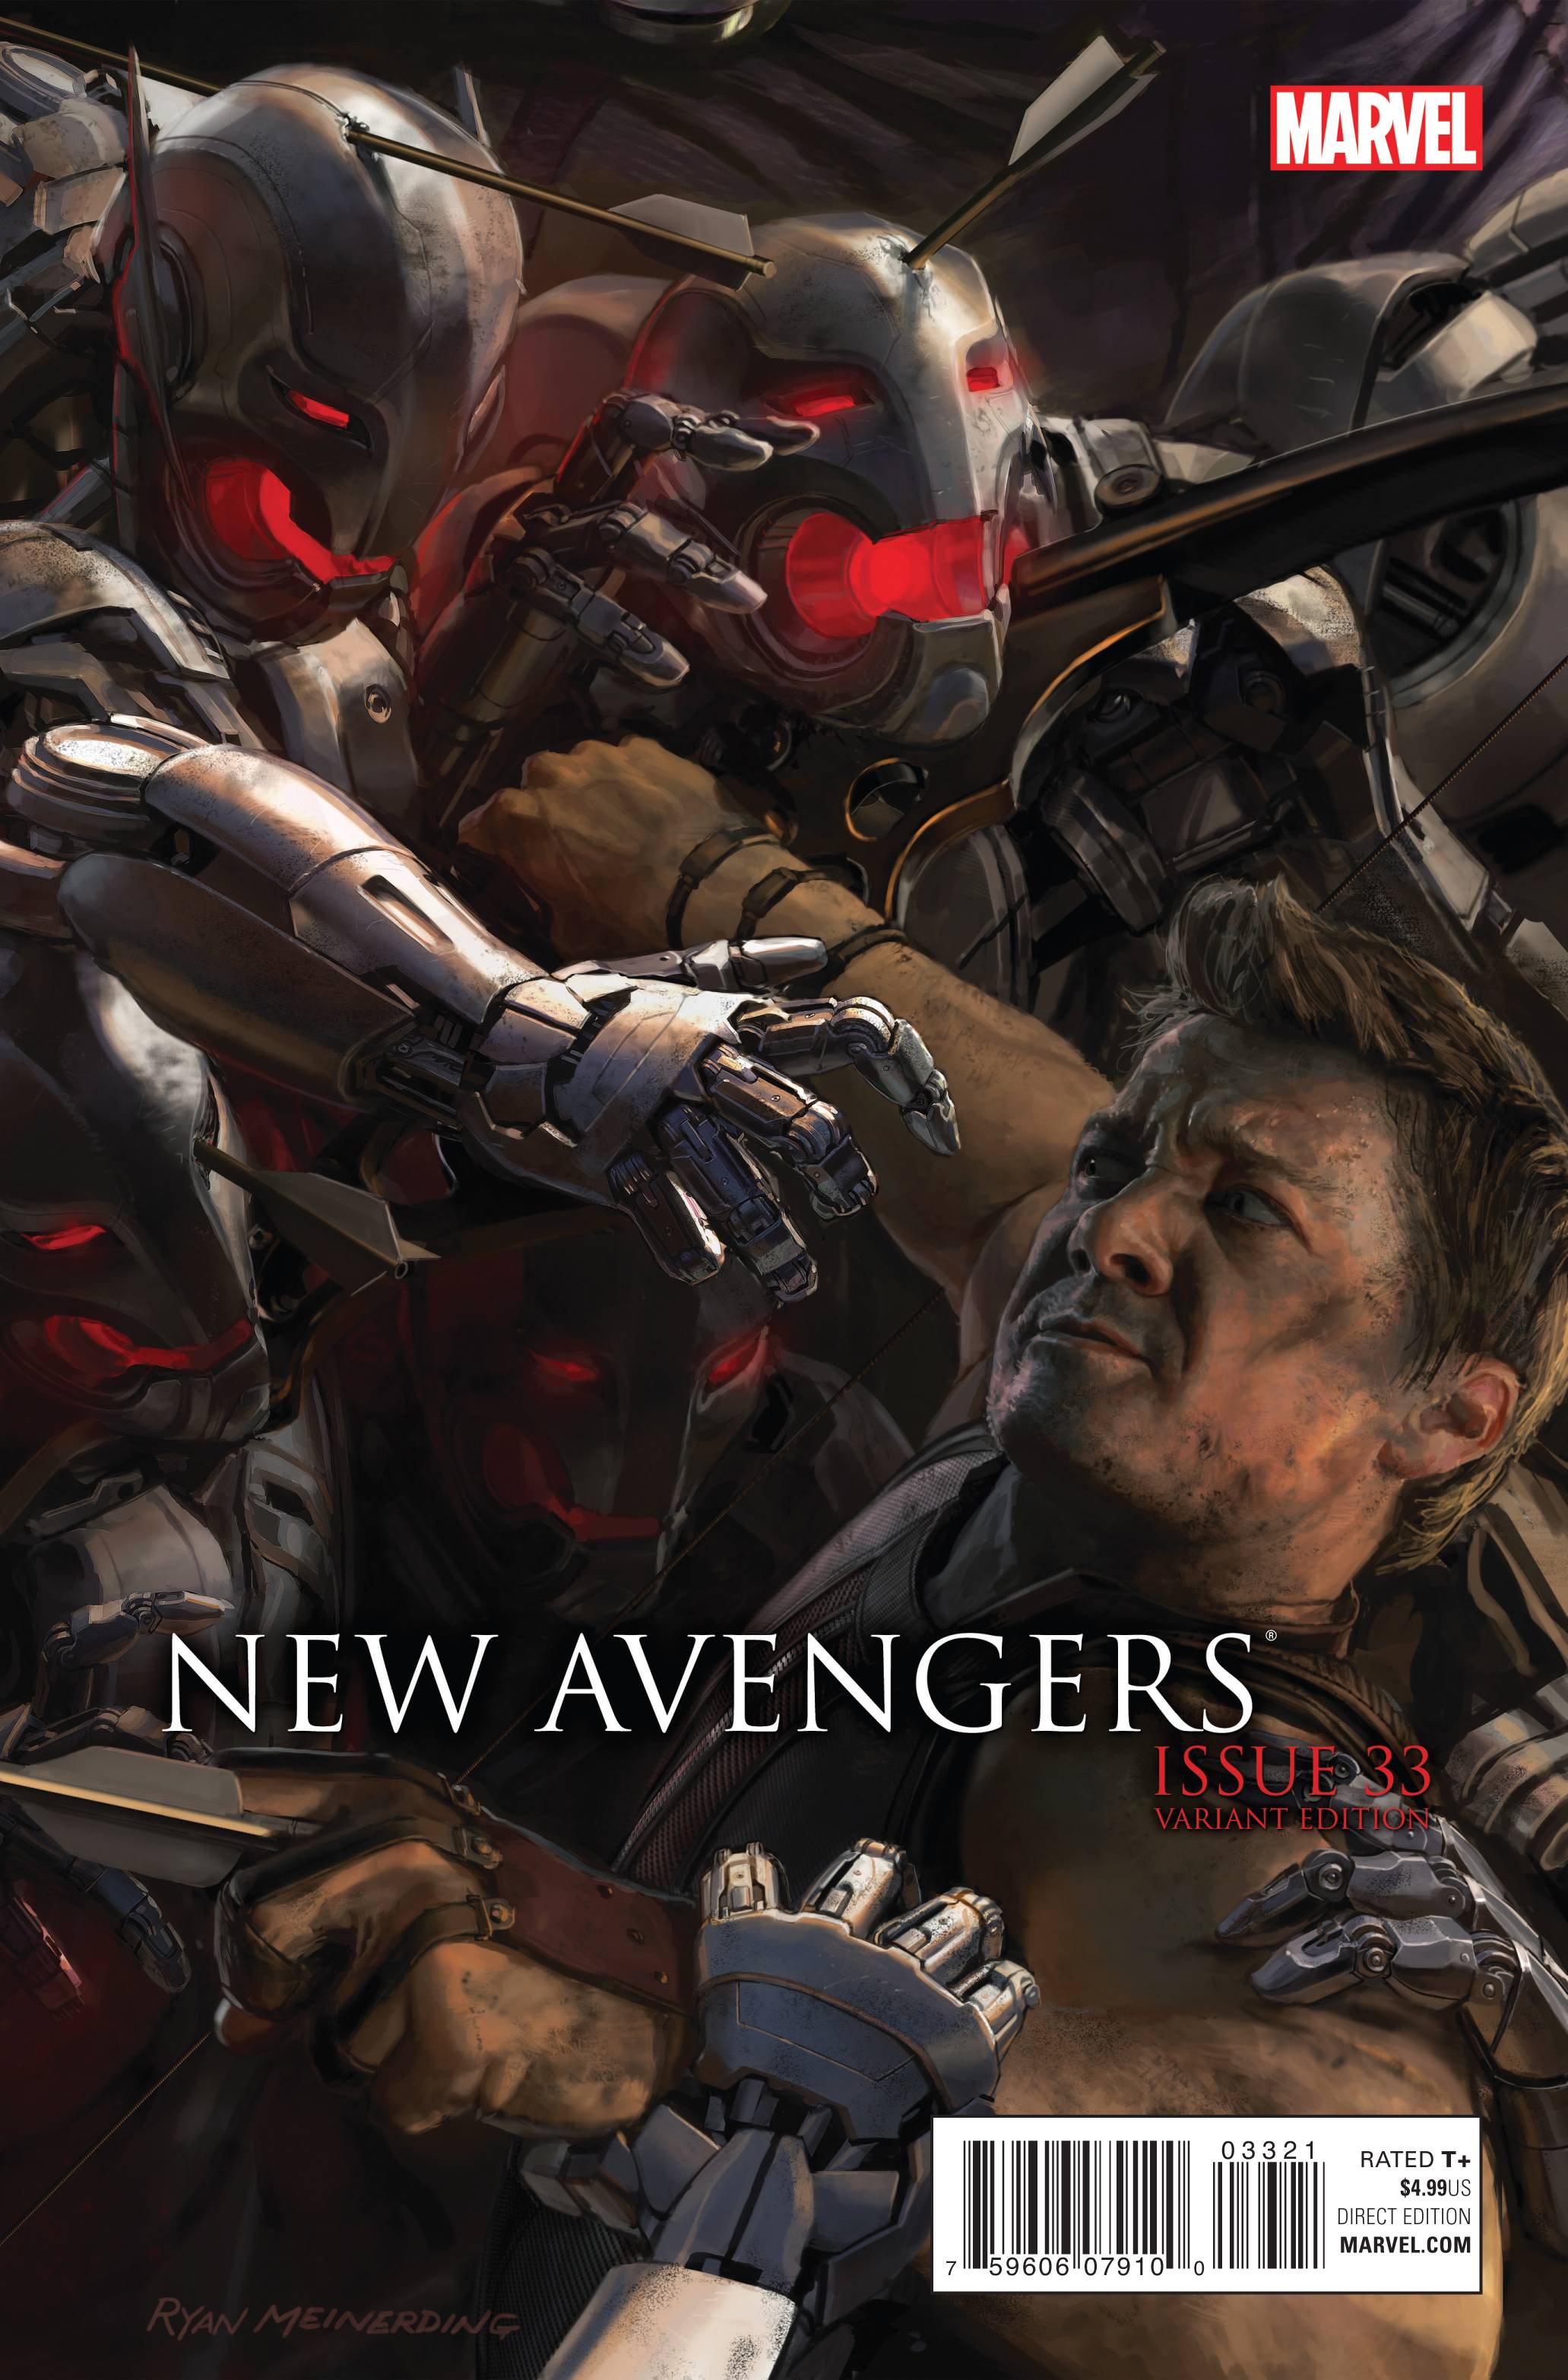 New Avengers #33 (Au Movie Connecting Variant D) (2013)